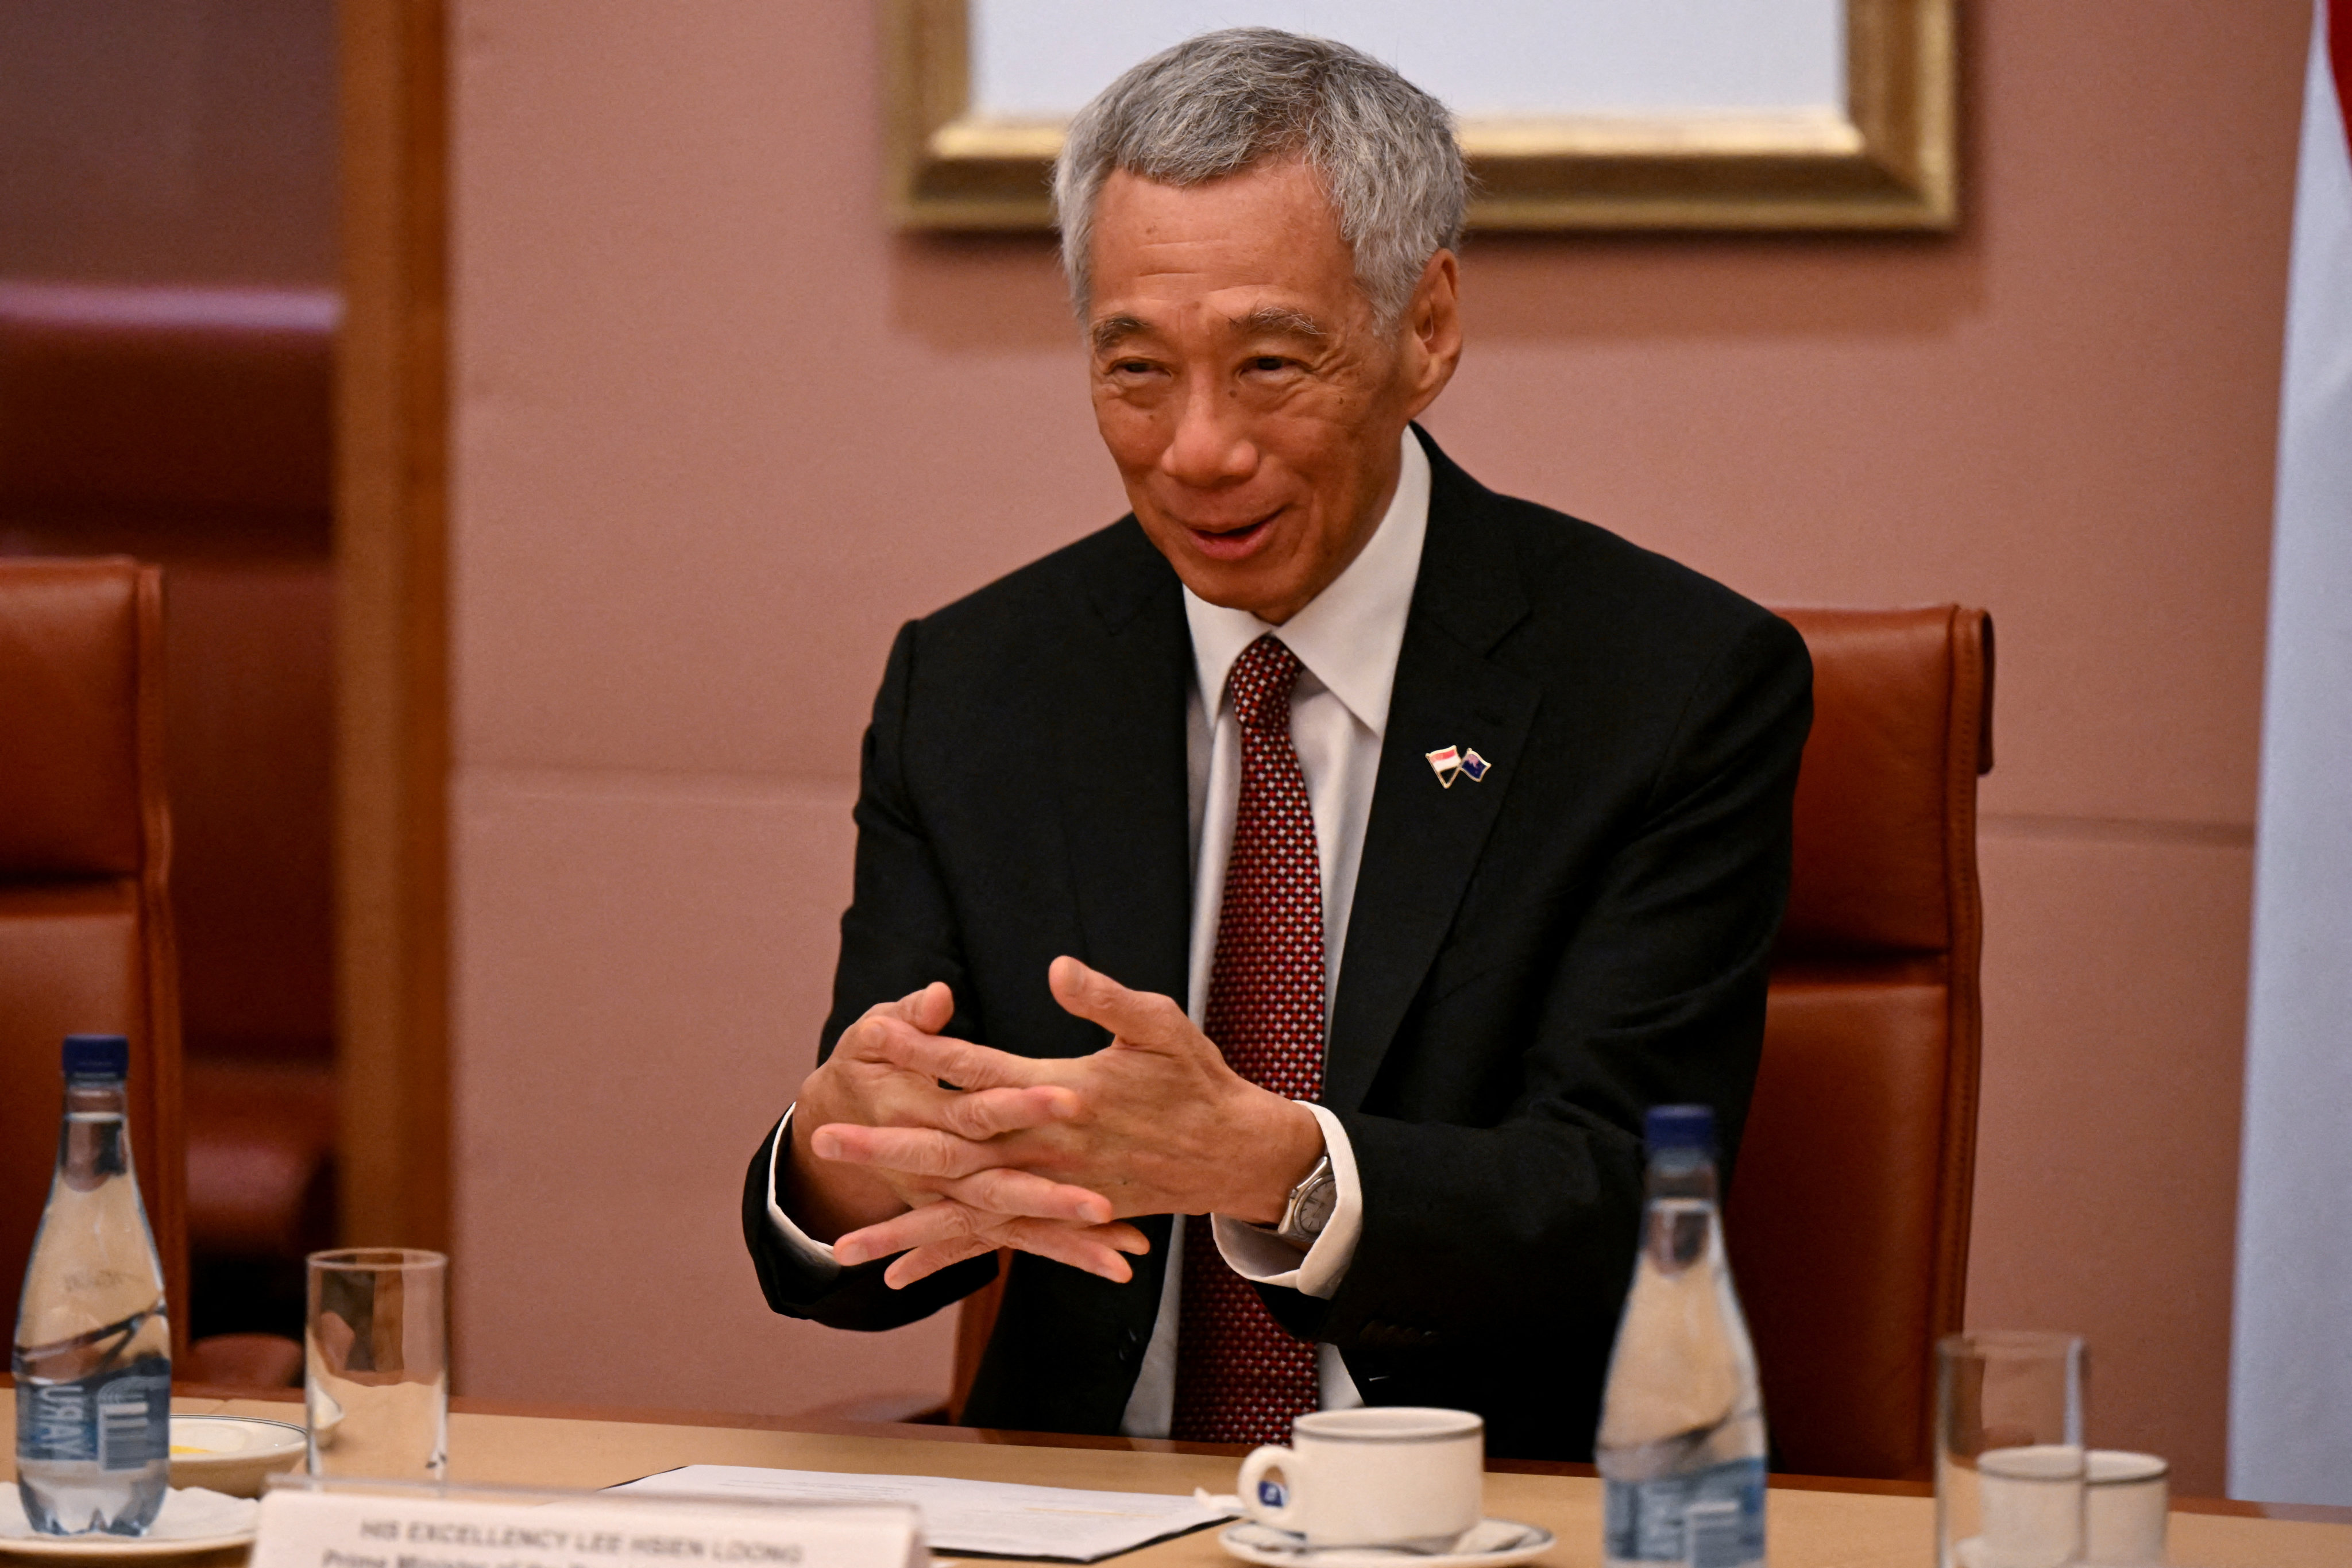 Prime Minister of Singapore Lee Hsien Loong. Photo: Pool via Reuters/File